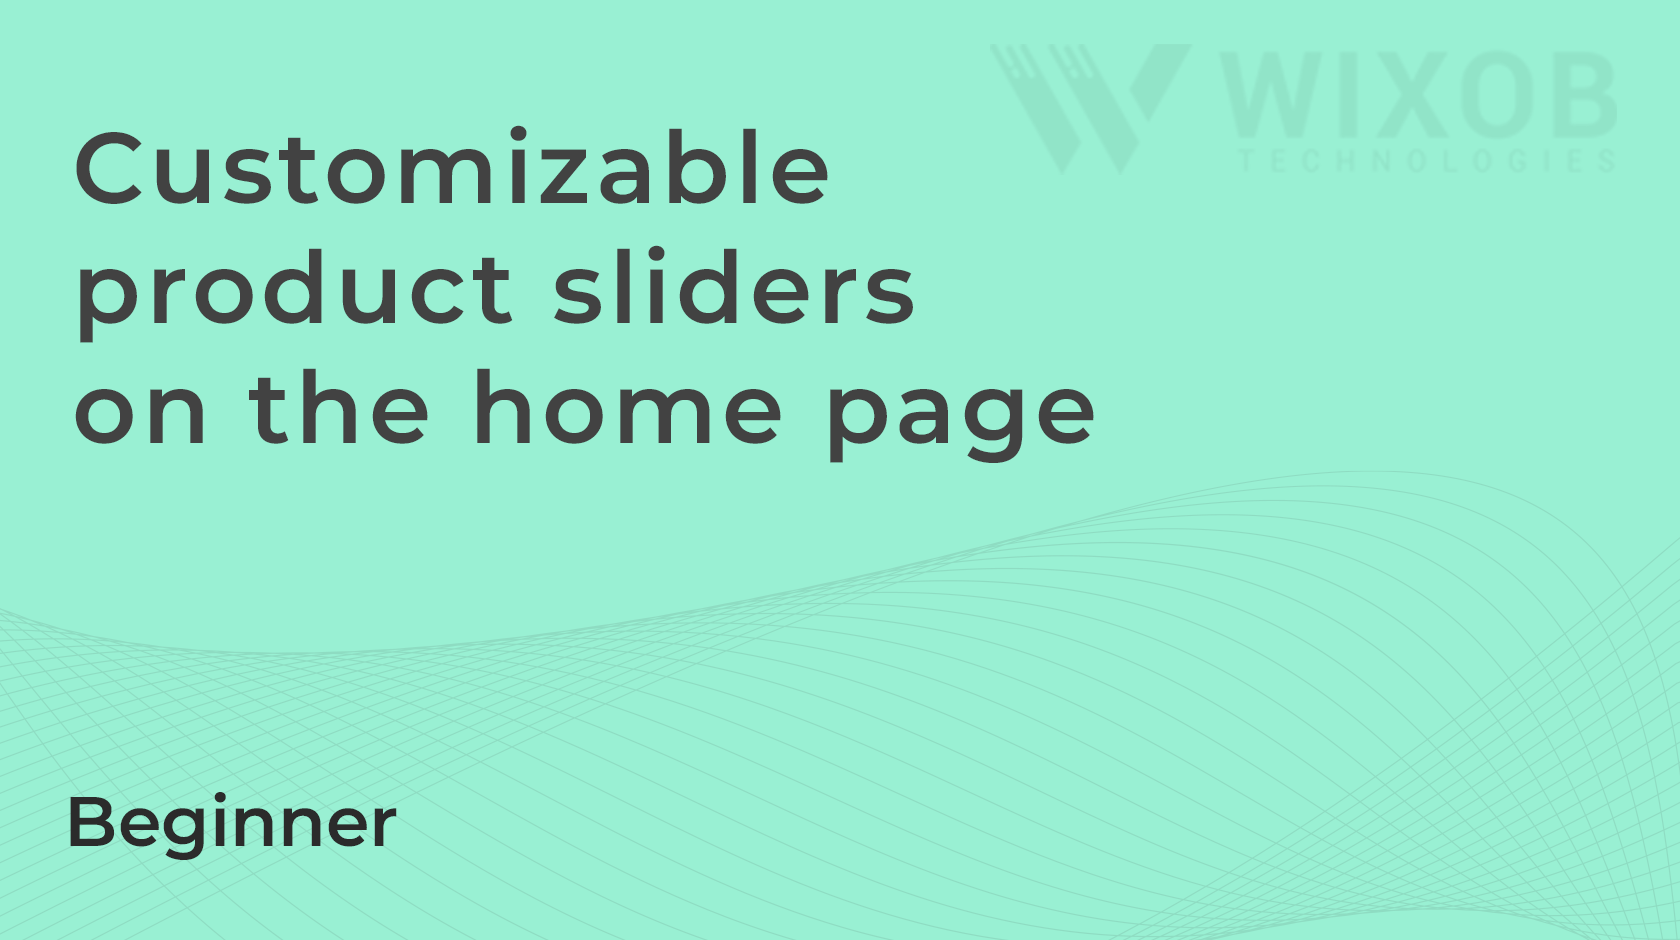 Customizable product sliders on the home page